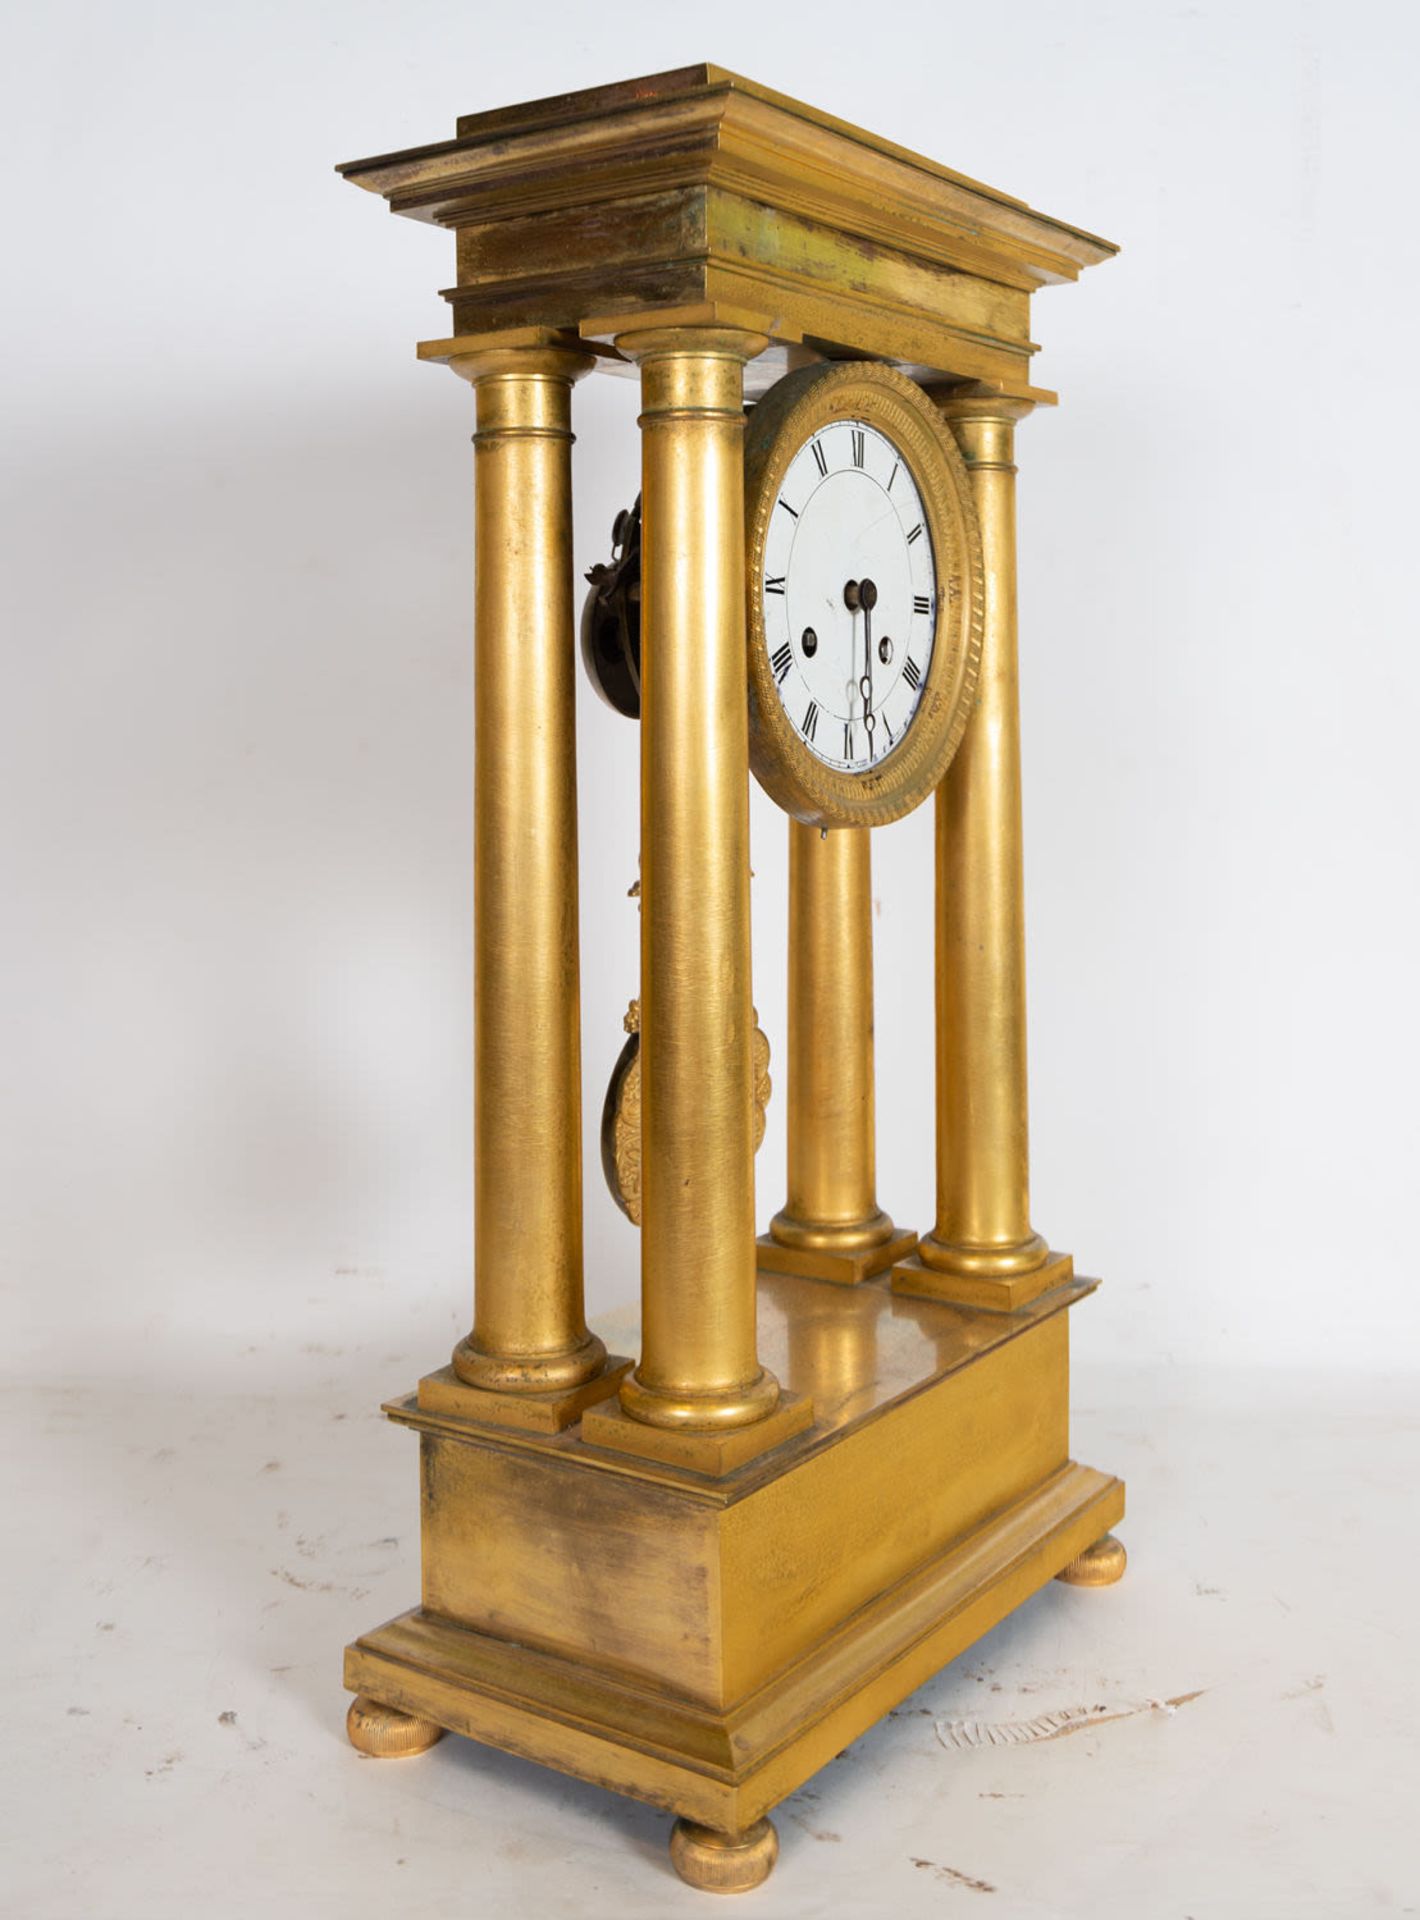 Large Bronze Clock in the shape of a Shrine with columns, French school of the 19th century - Image 3 of 5